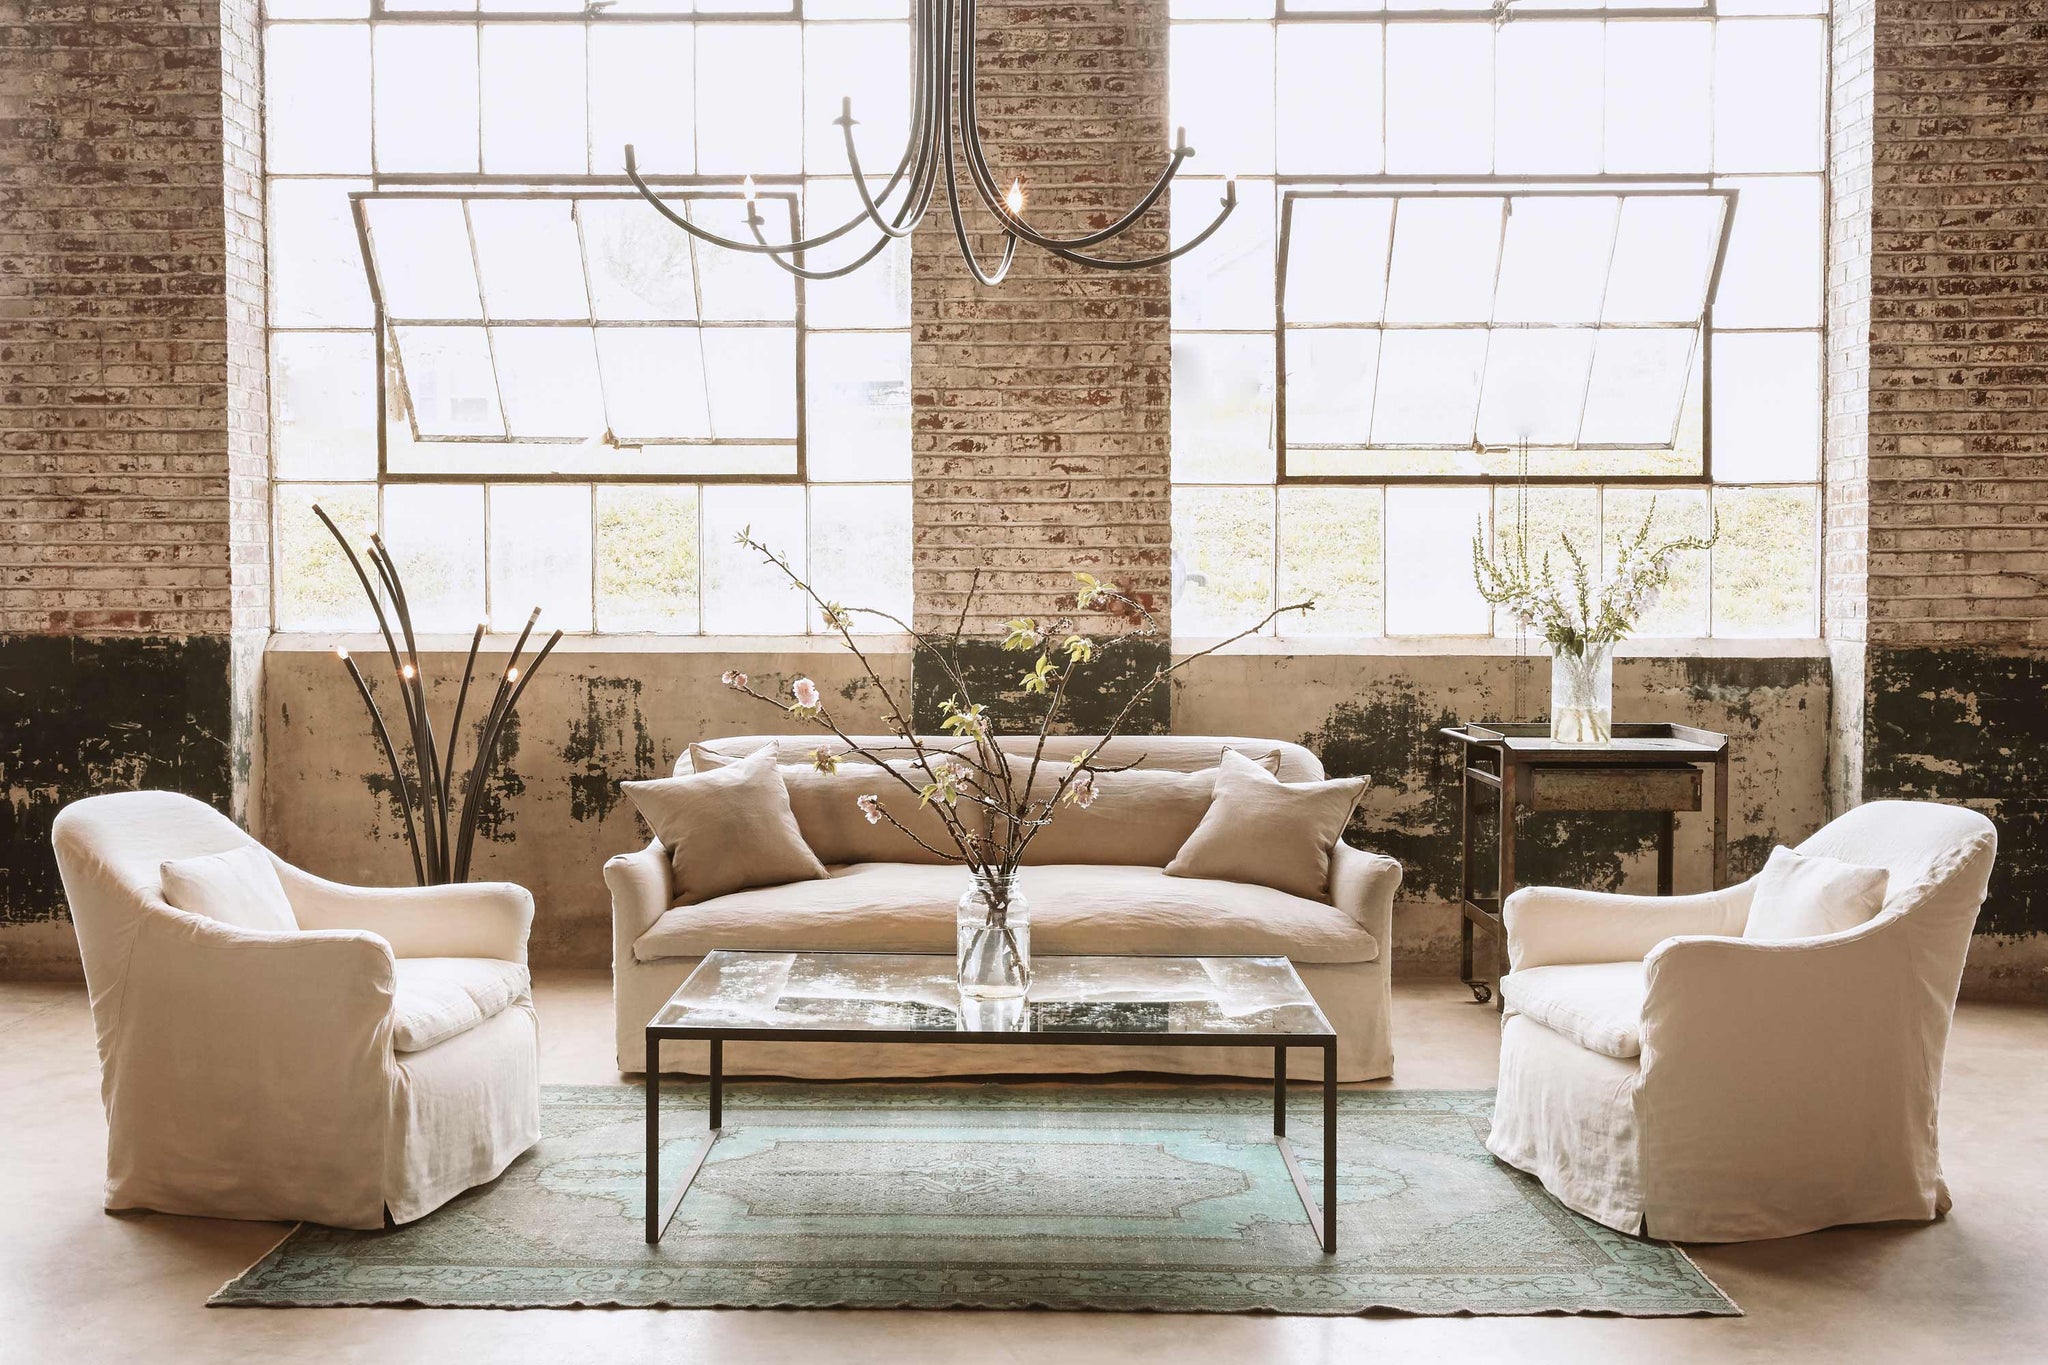  Daytime in a showroom with large windows and brick wall. The Hazel sofa is slipcovered in Quixote Oatmeal, with 2 Hazel Chairs on each side, also slipcovered in a white linen. The coffee table is rectangular with a mirror top. There is a floor lamp with multiple branches on the left and a Ramo chandelier hanging from the ceiling. Photographed in Brevard Burlap. 